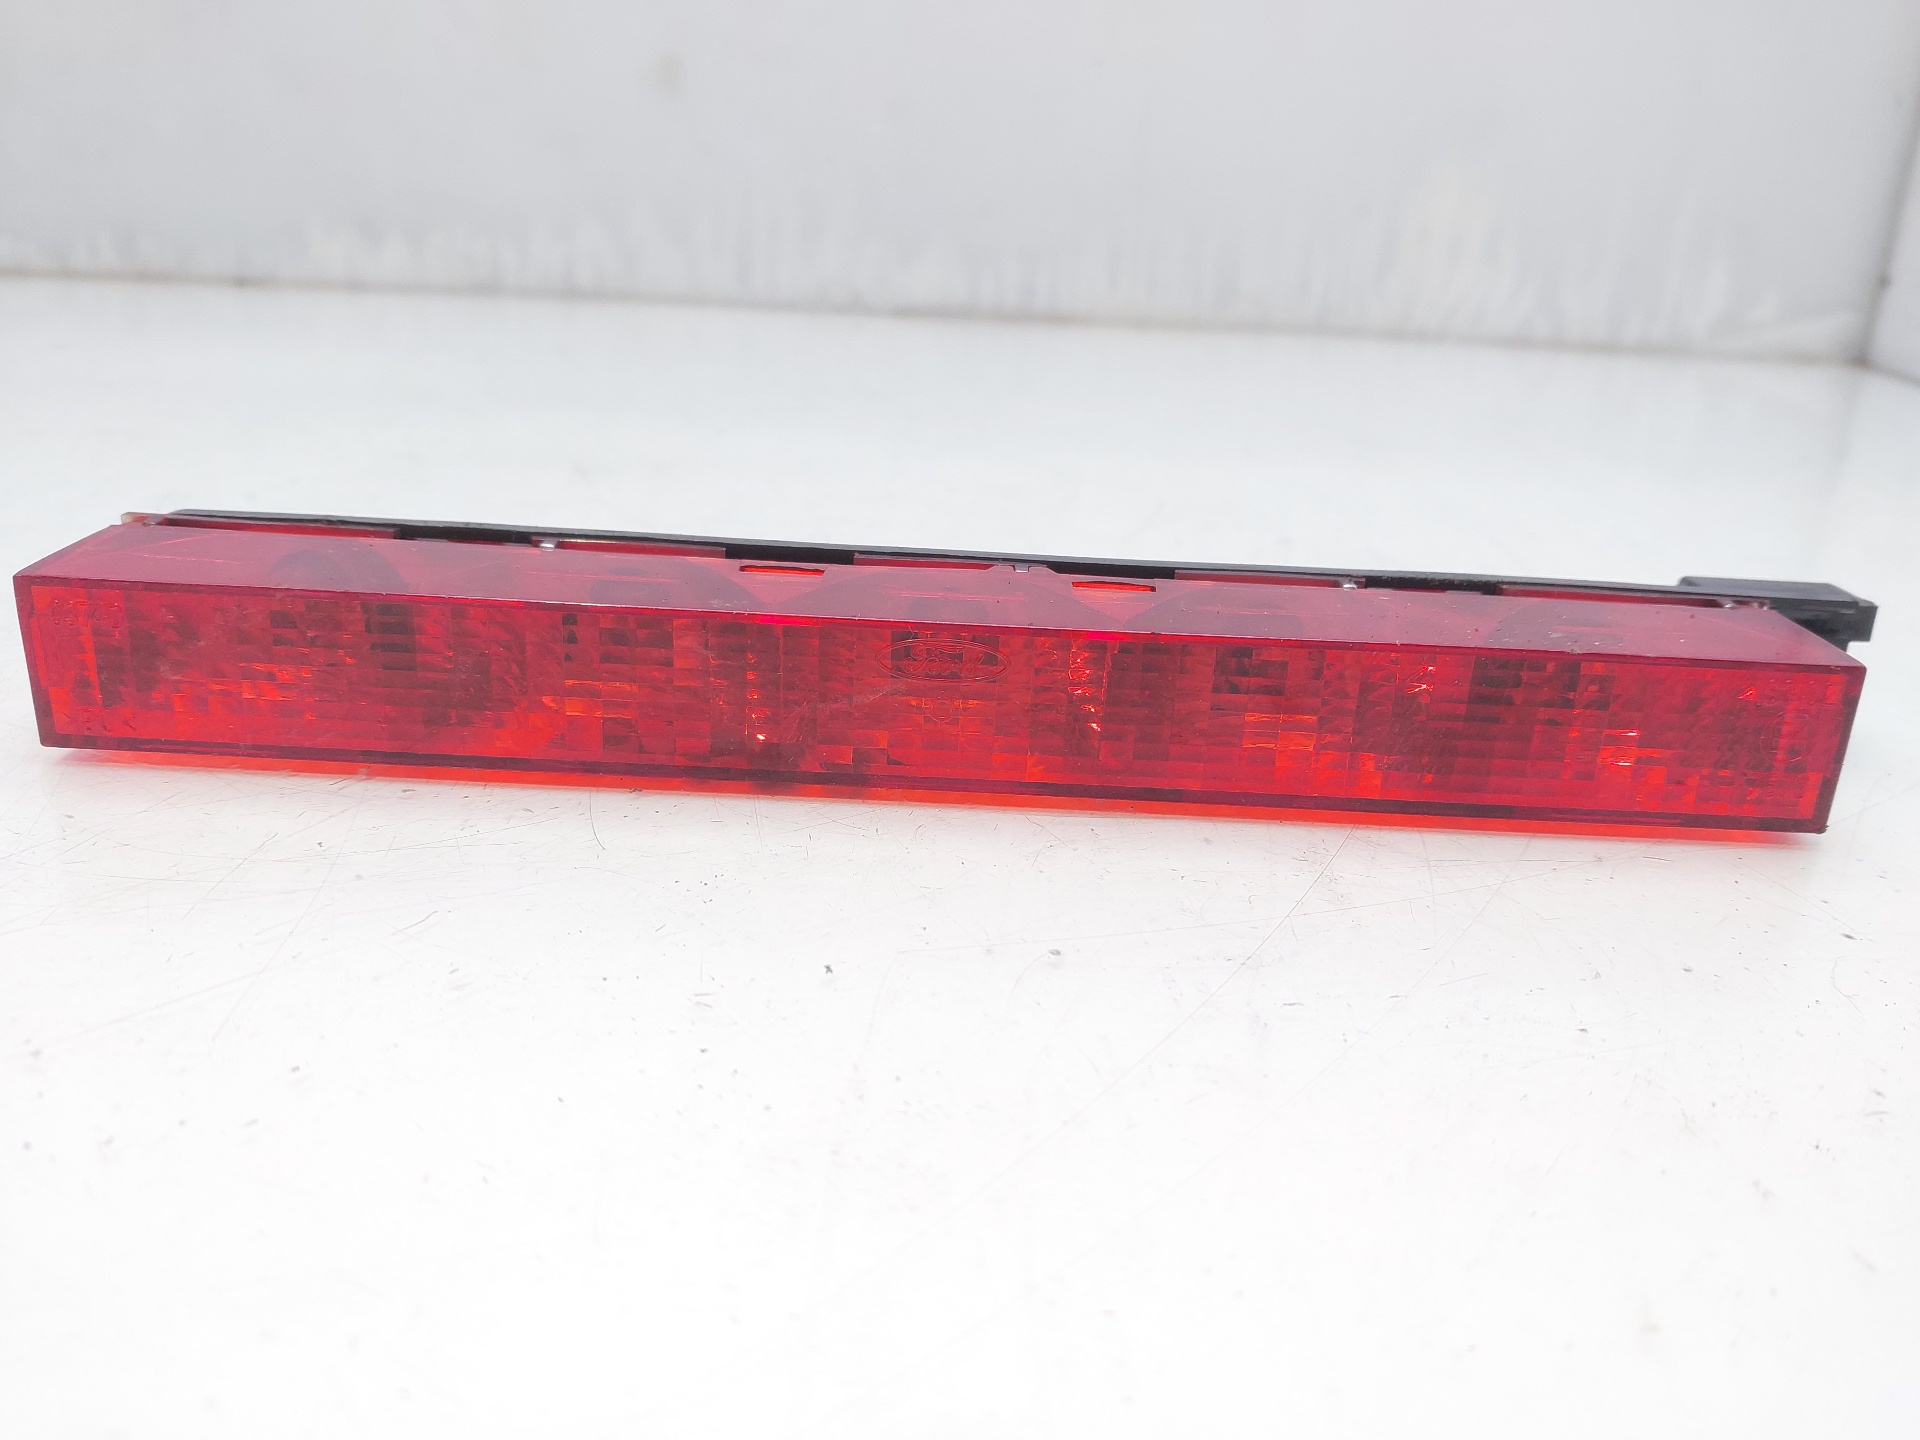 FORD Focus 2 generation (2004-2011) Rear cover light 1S7113A613AE 20643975